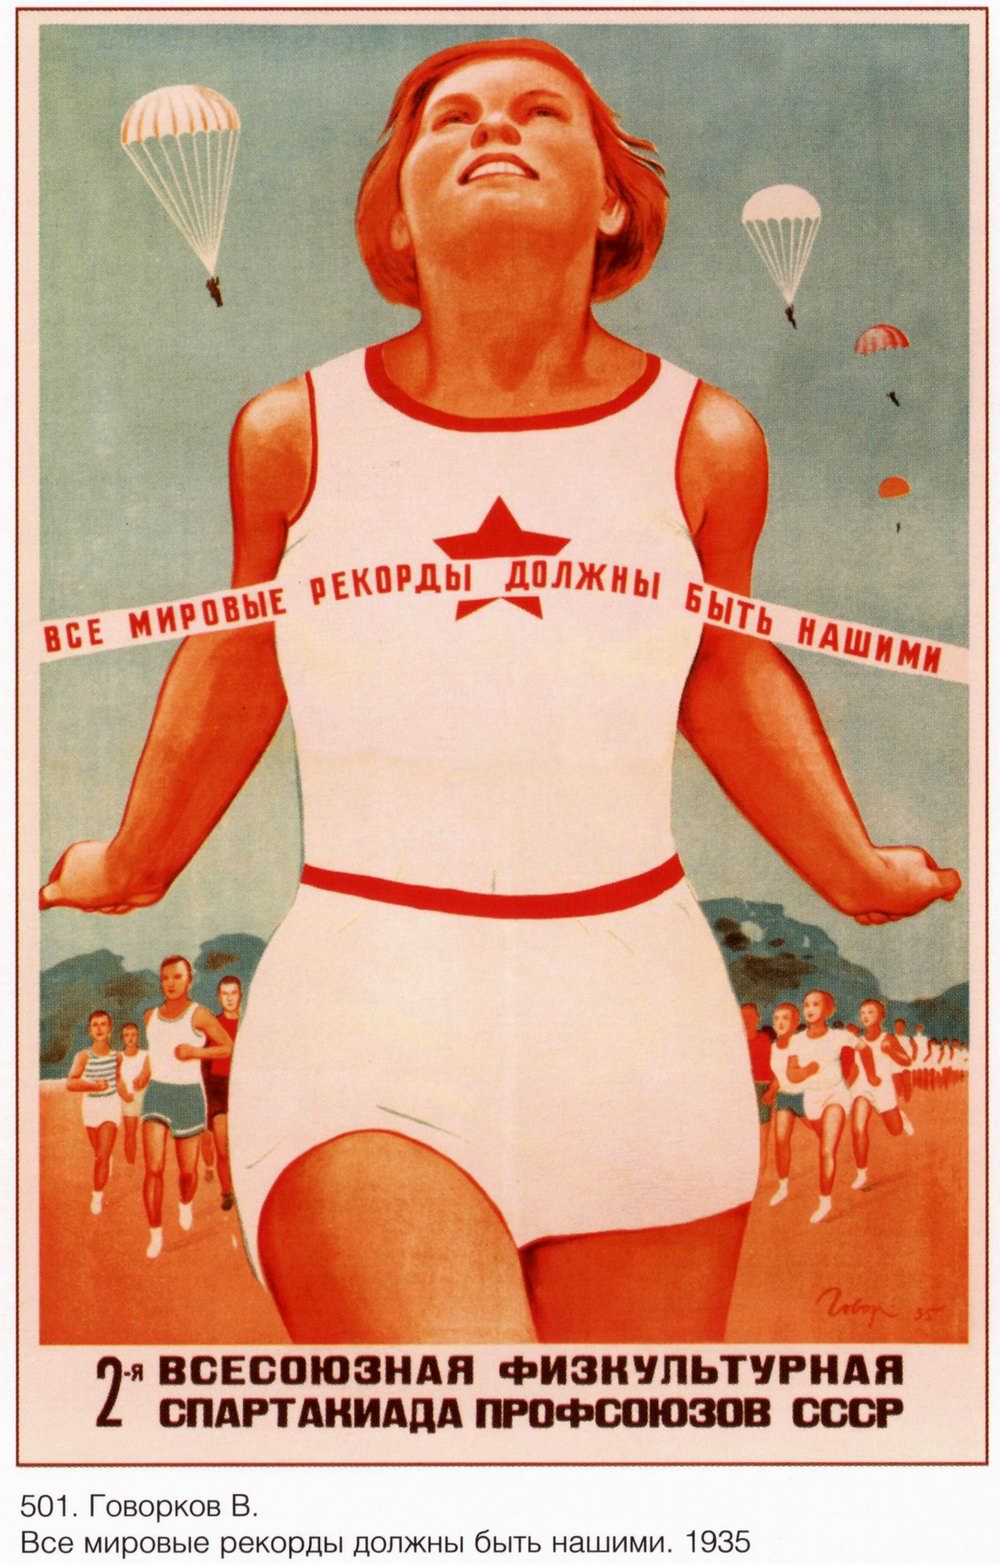 The Image Of A Woman In Soviet Propaganda · Russia Travel Blog